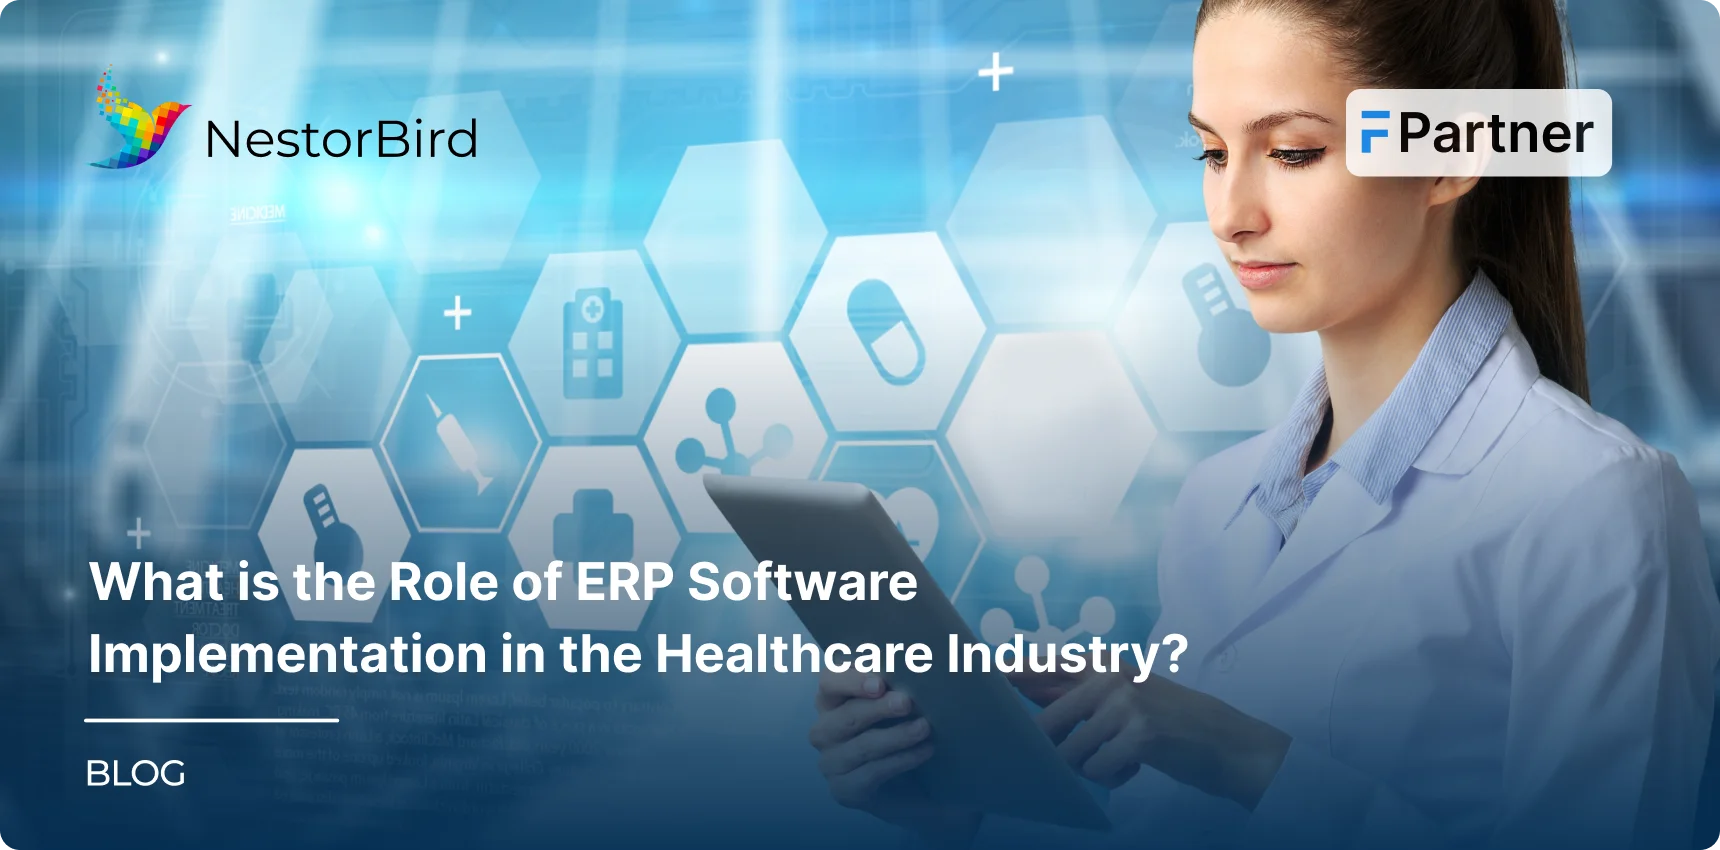 What is the Role of ERP Software Implementation in the Healthcare Industry?